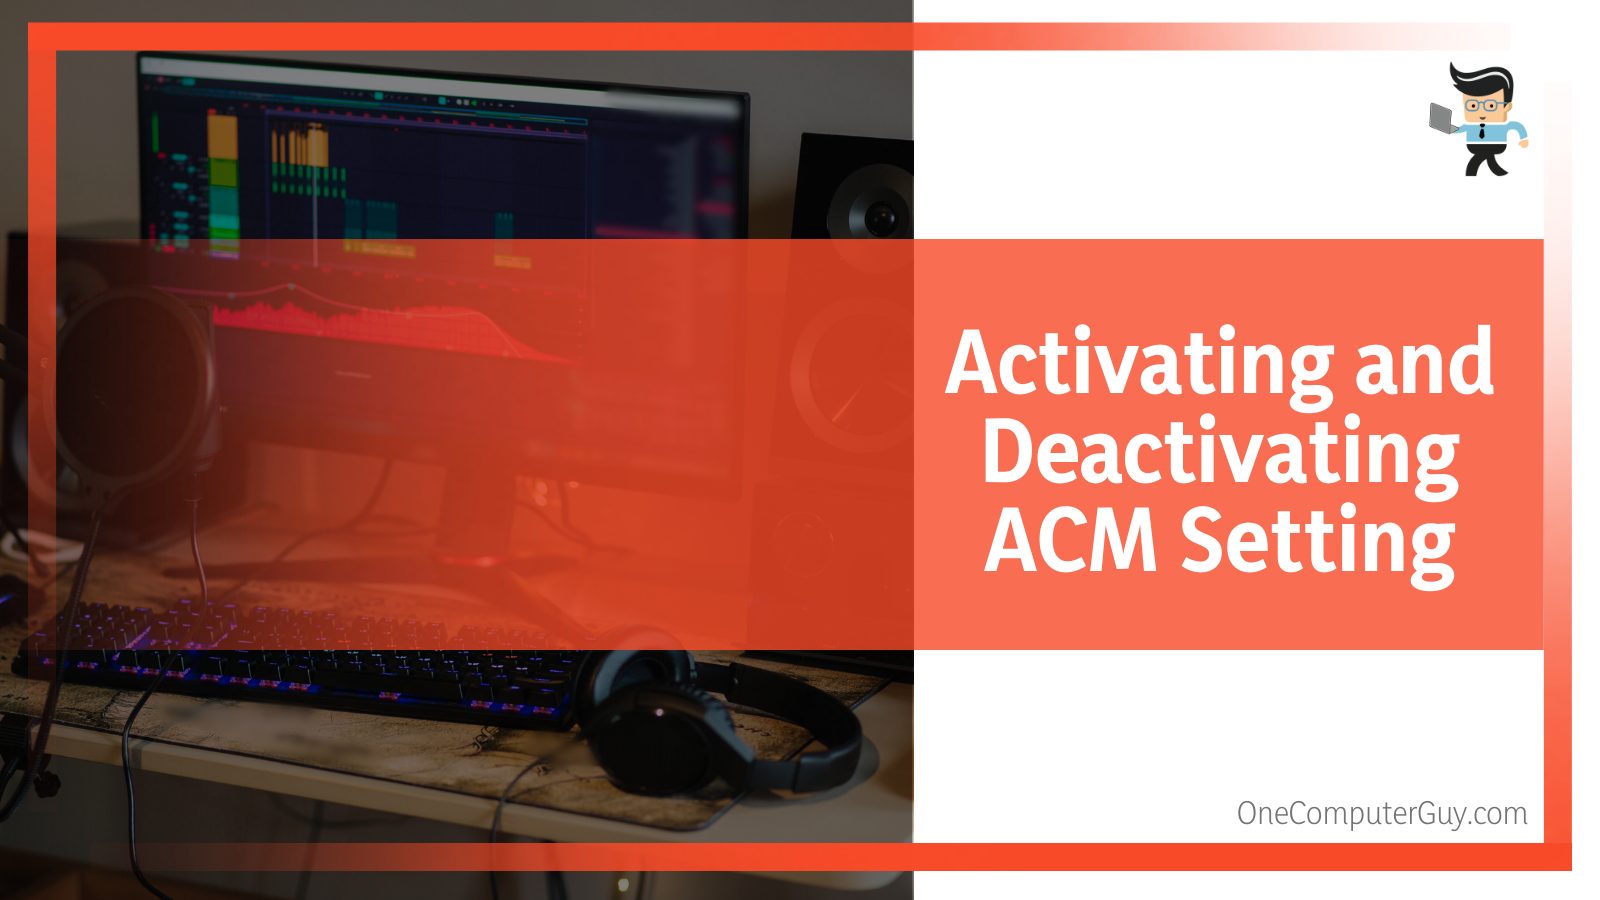 Activating and Deactivating ACM Setting